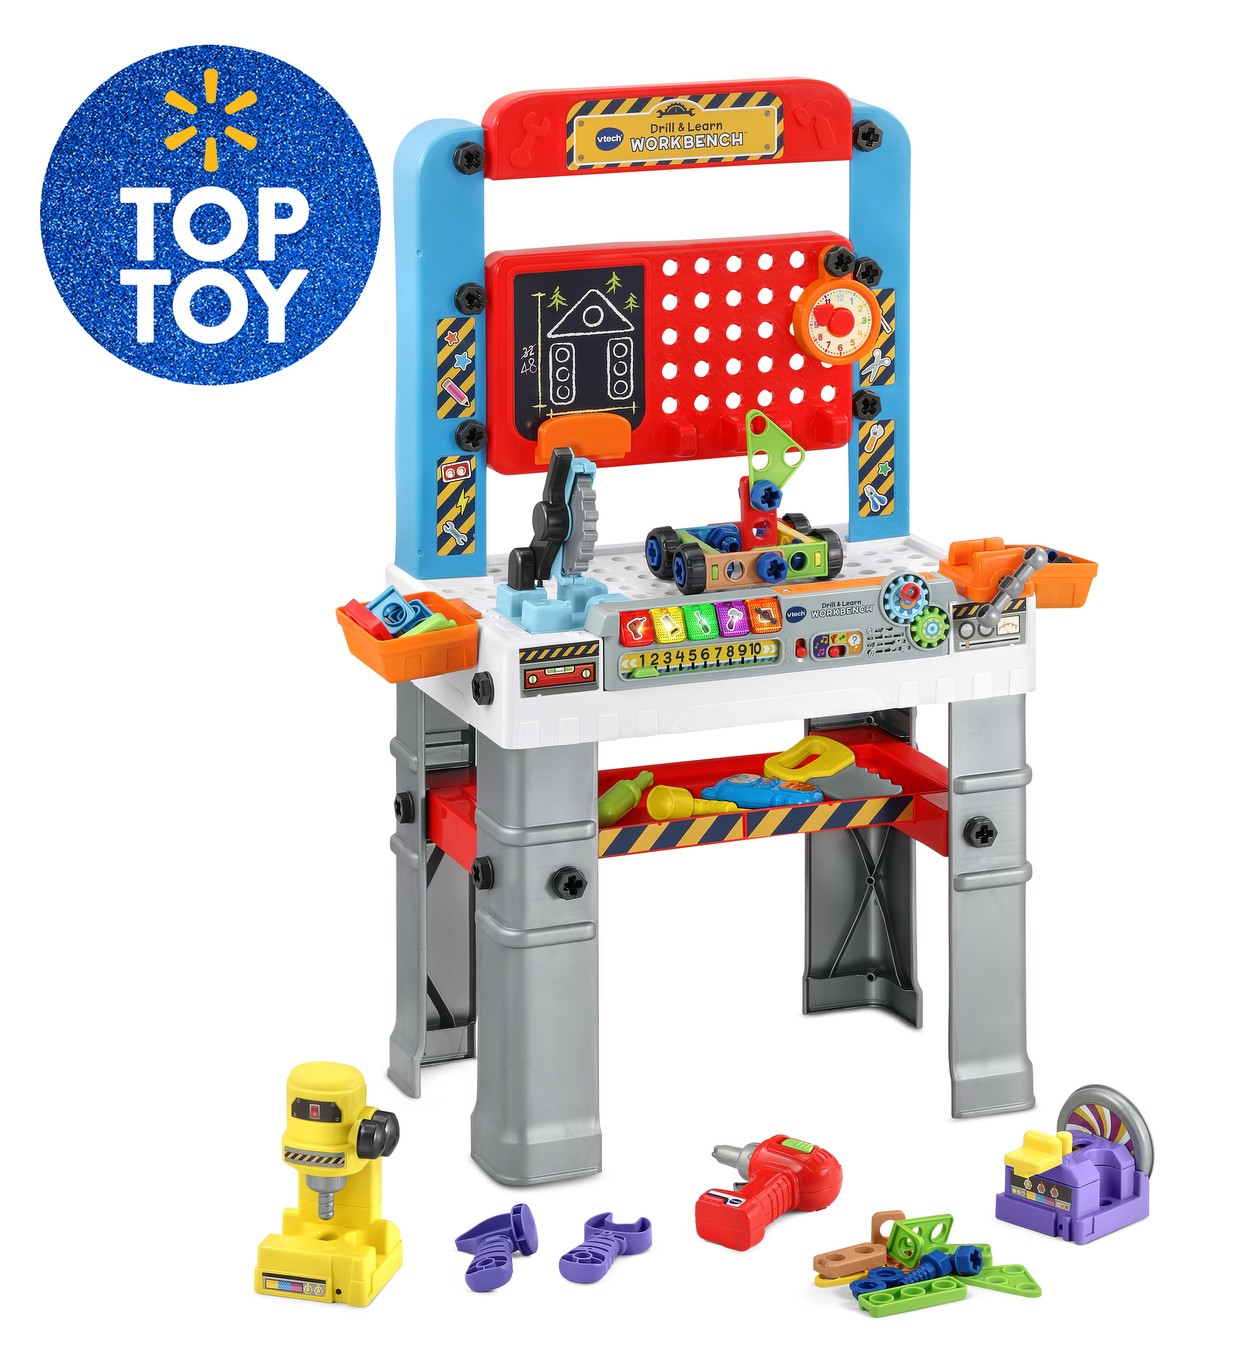 VTech® Drill & Learn Workbench™ With Tools for Preschoolers